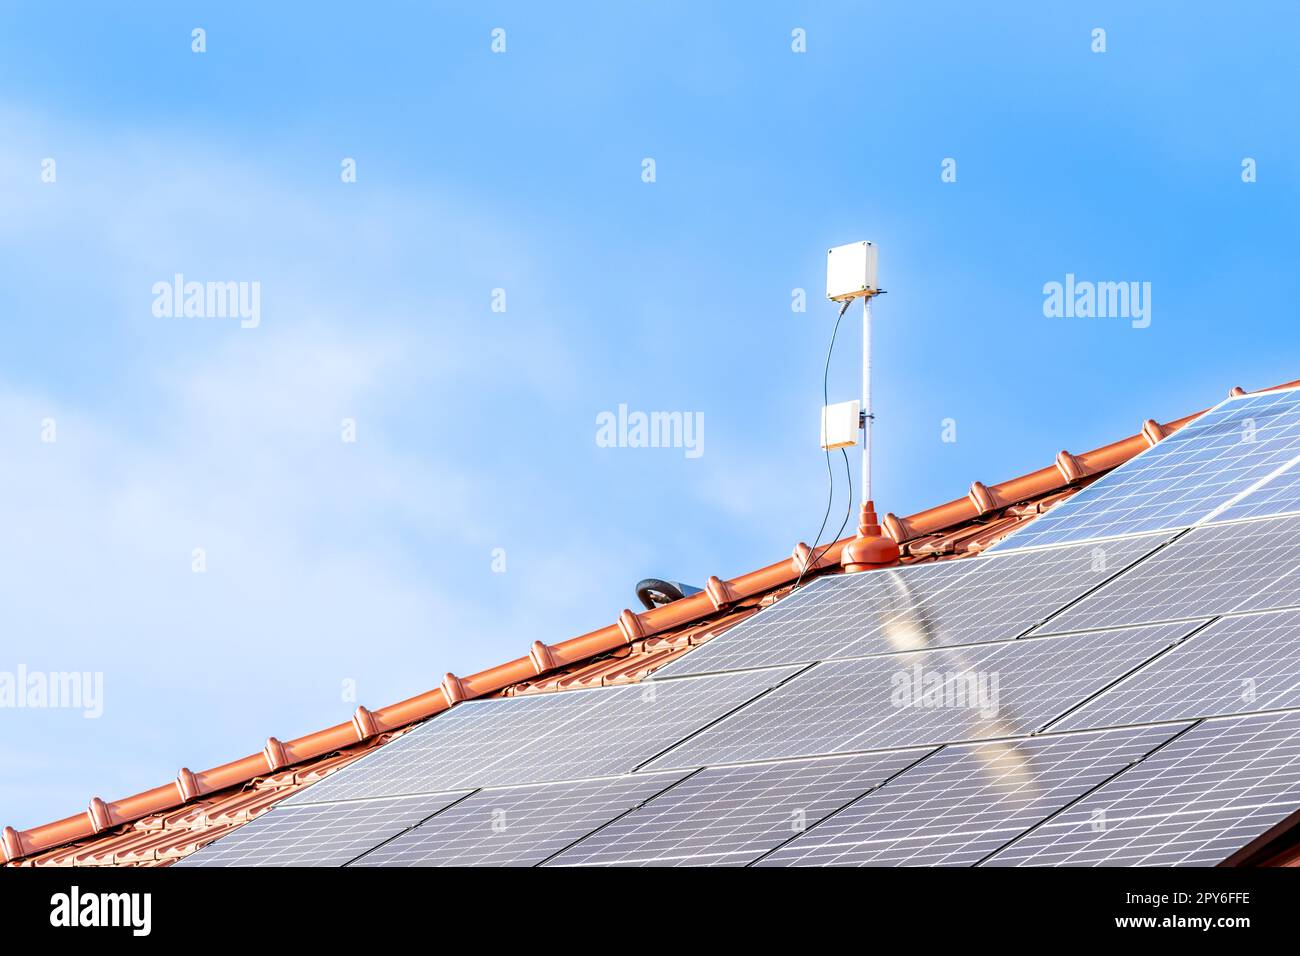 solar panels for generating electricity from the sun on the roof. copy space Stock Photo